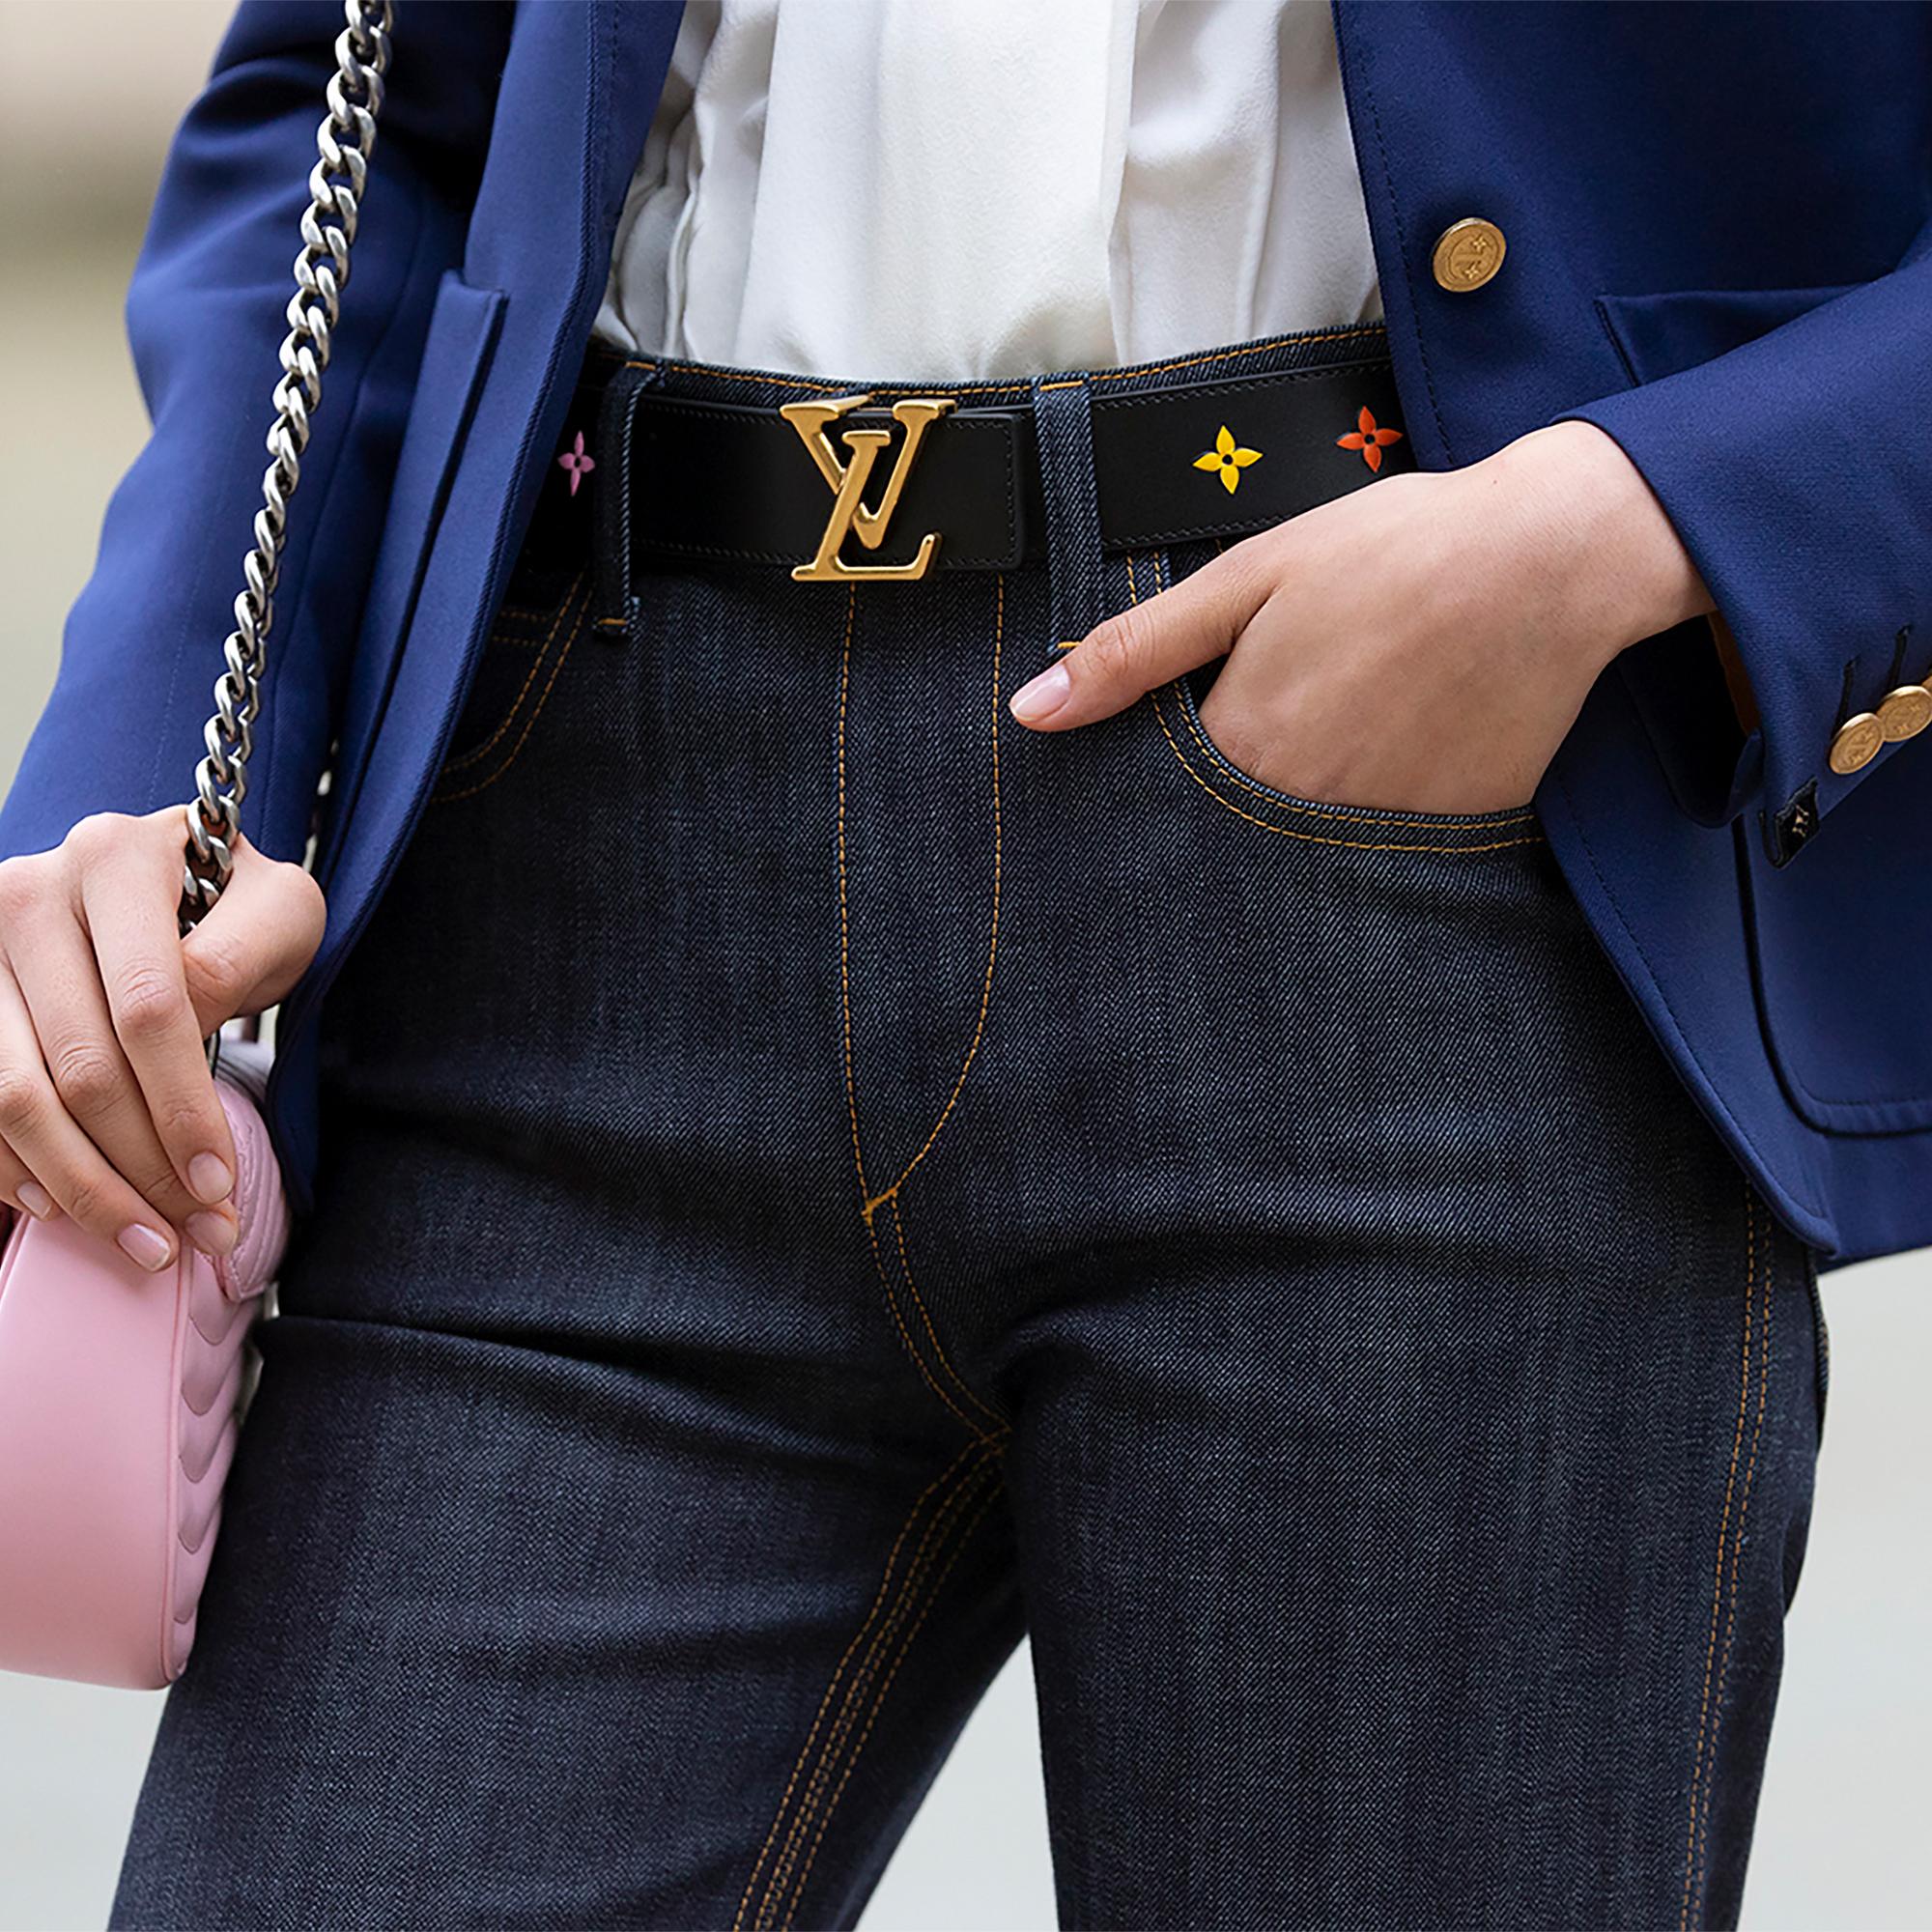 Louis Vuitton cellphone belt buckle is fake, potentially harmful to your  manhood